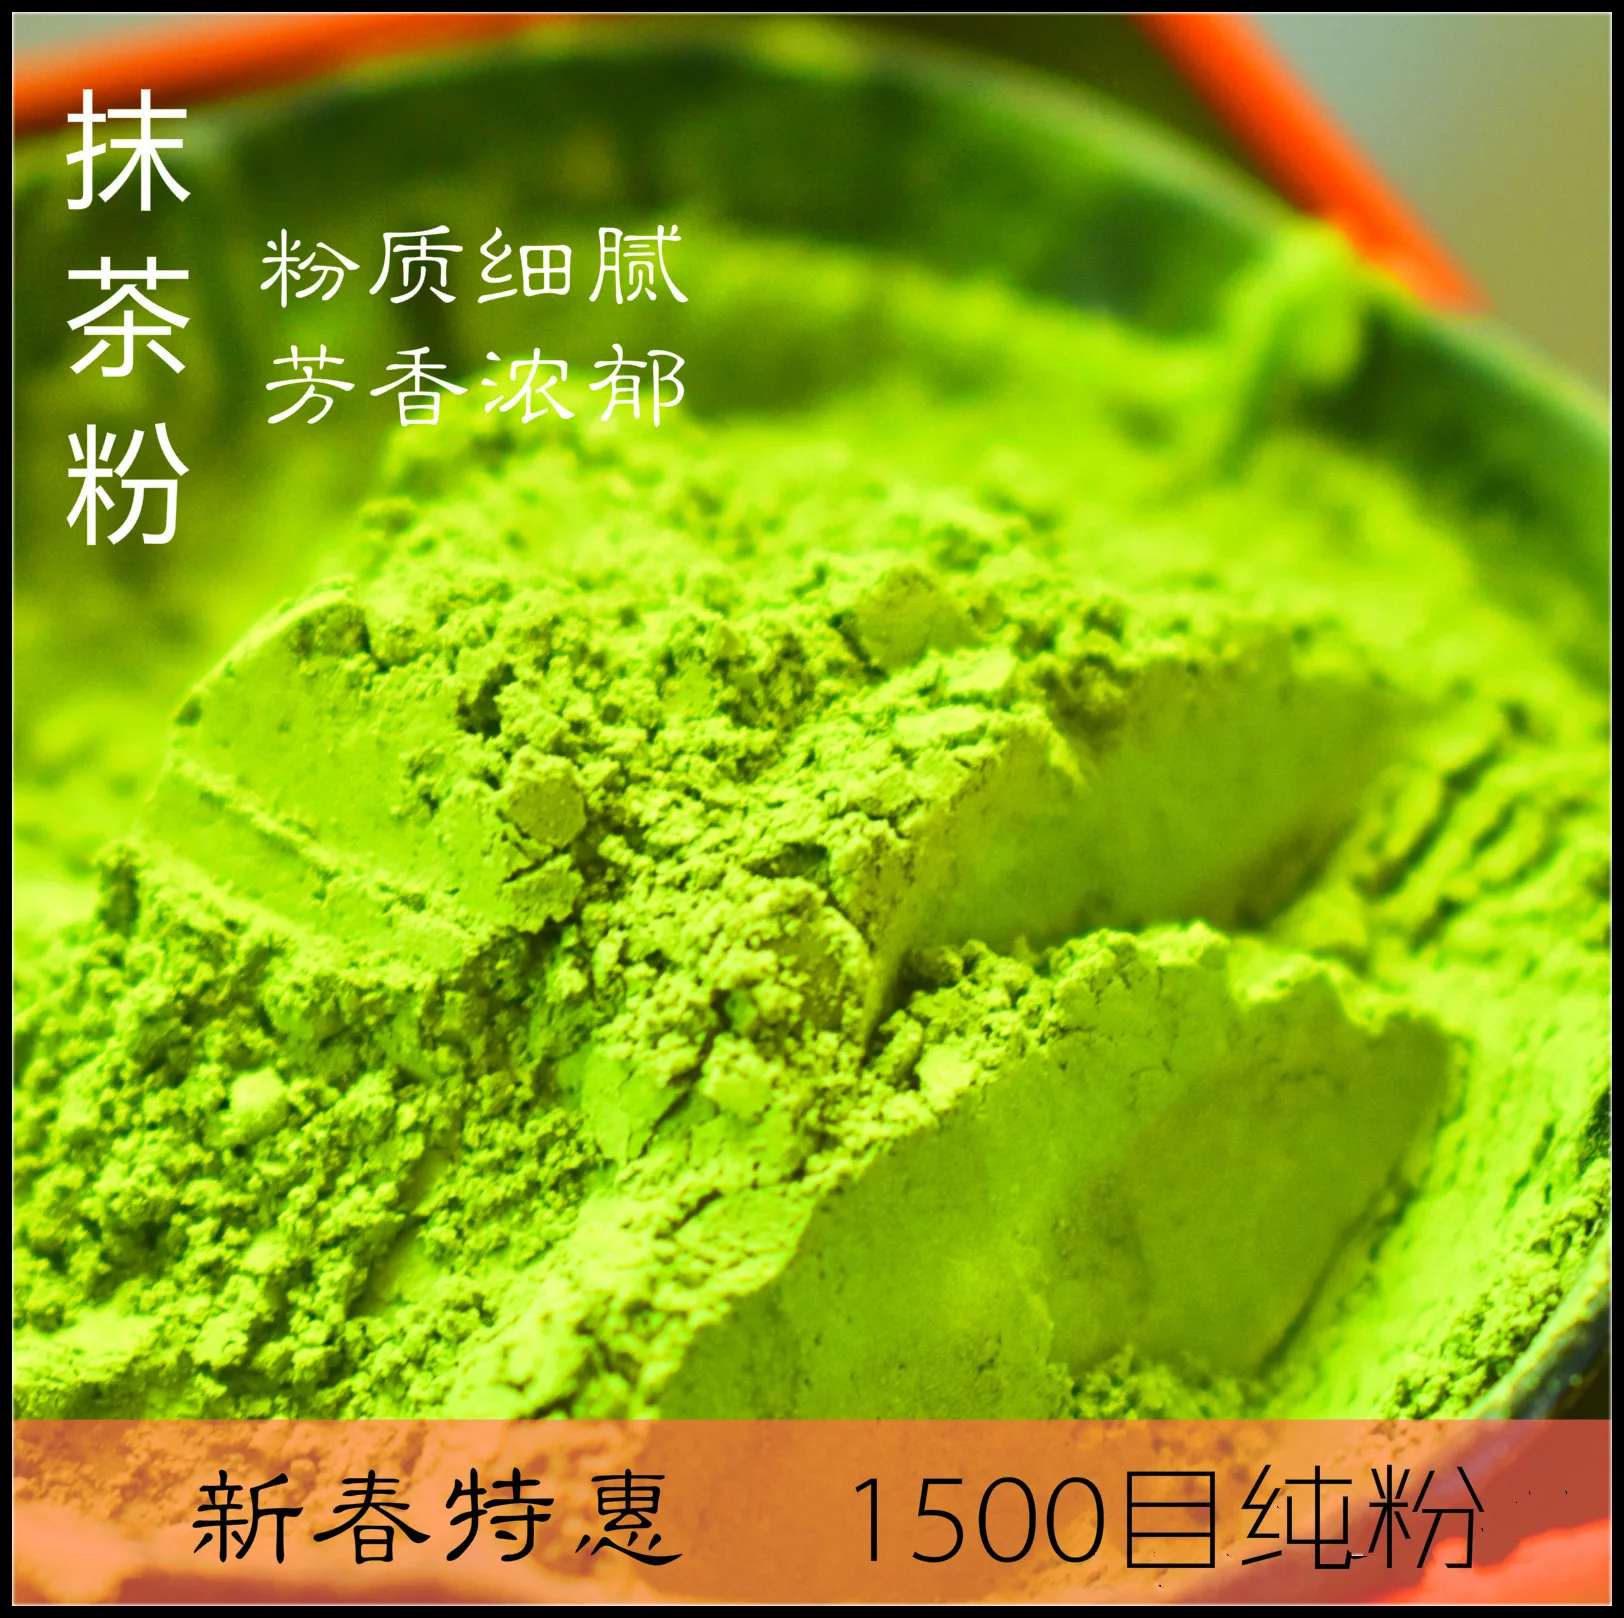 

7A Quality Premium Matcha Green Powder 100% Natural Organic Suitable for Baking Drink Tea Ceremony 500g